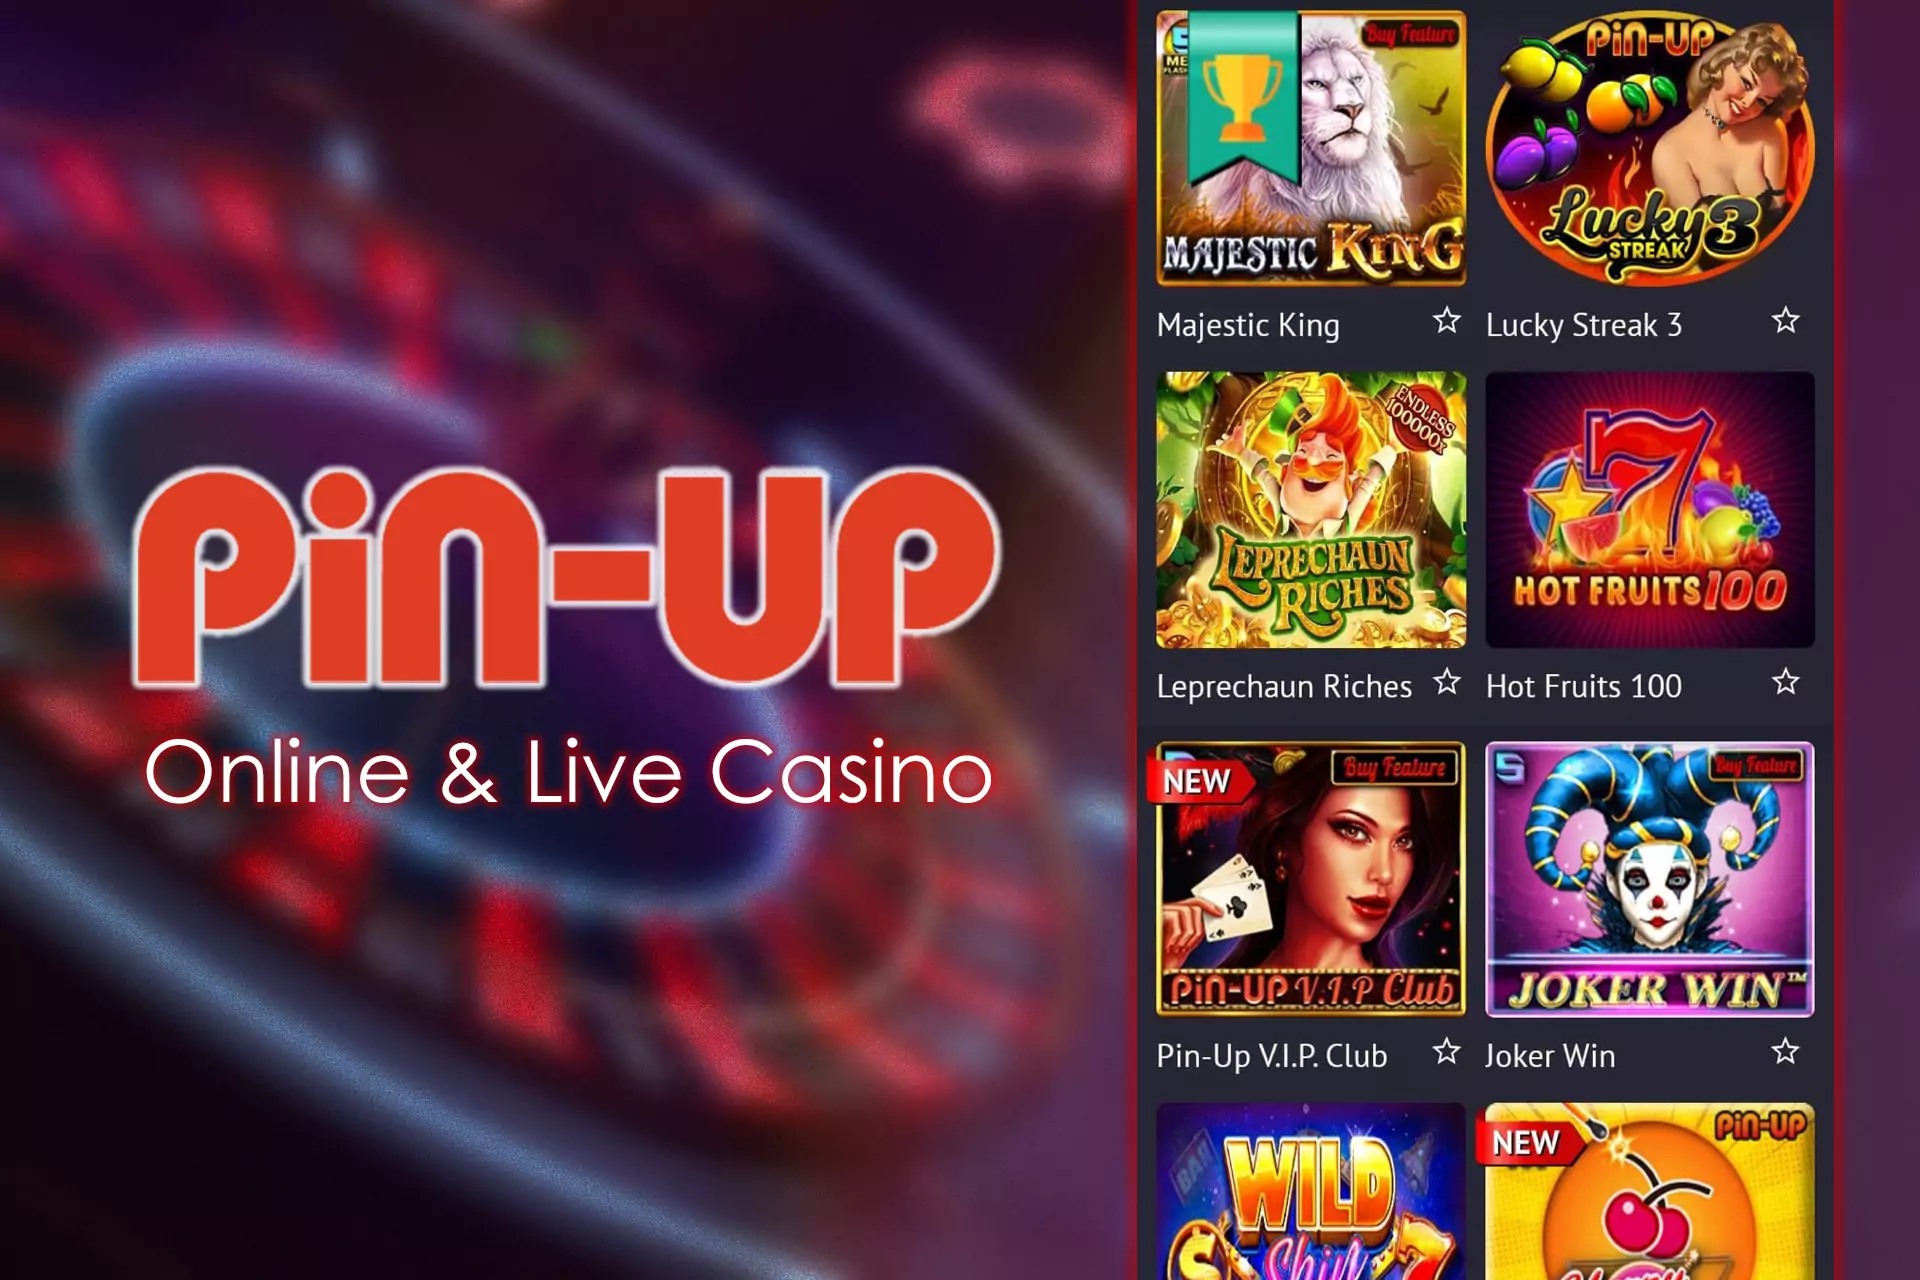 Online and Live Casino are the main specialization for the Pin-Up.